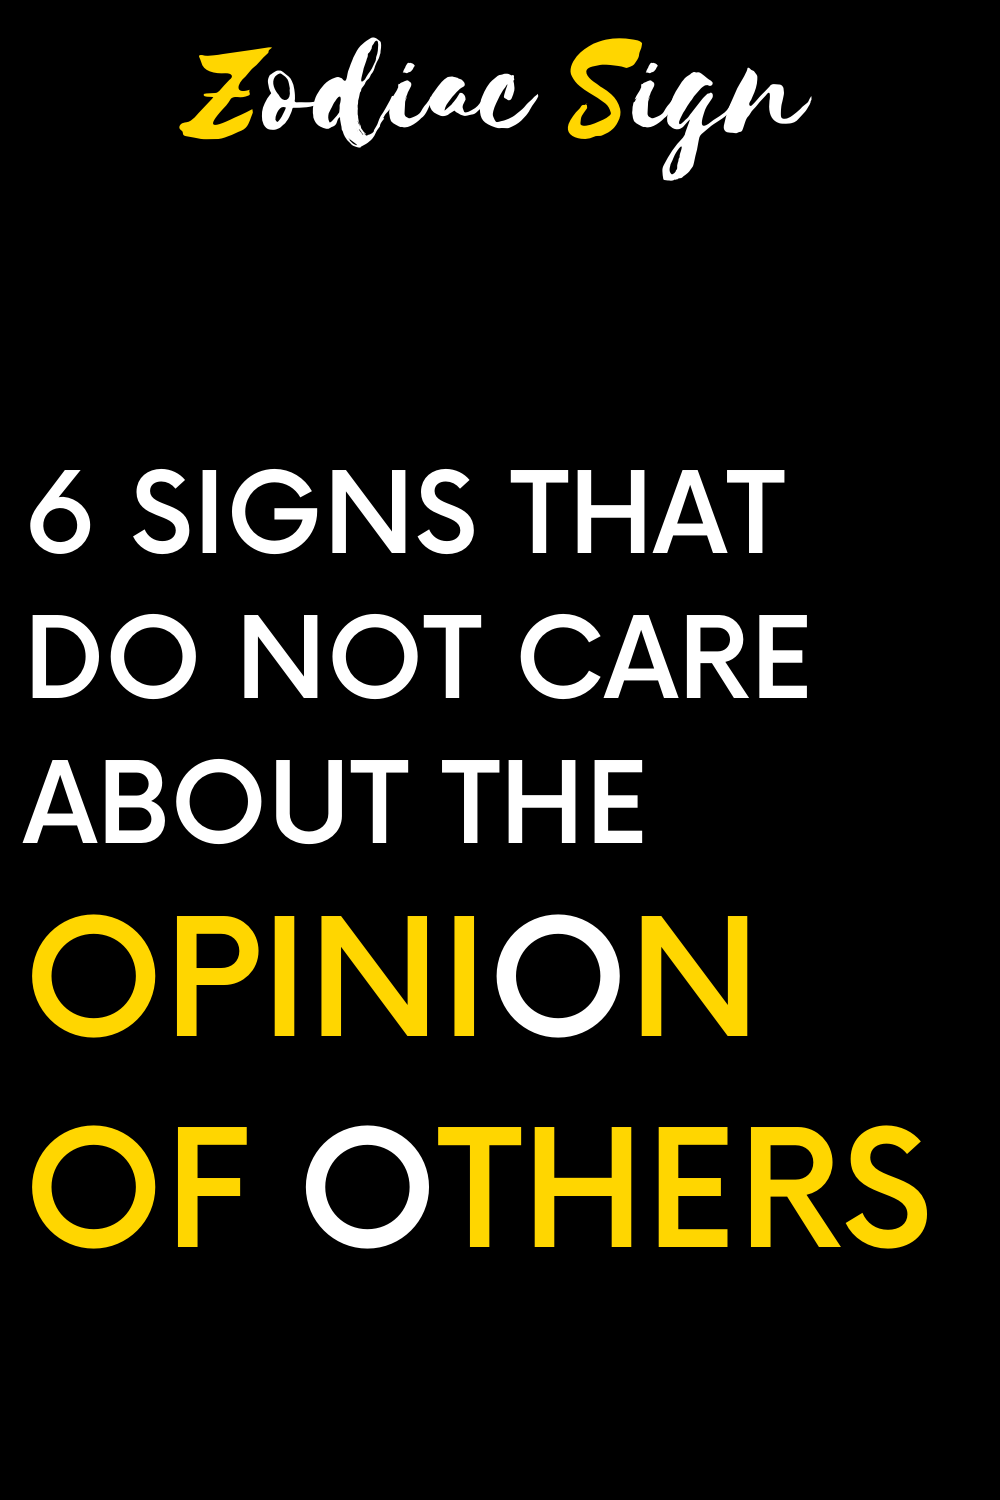 6 signs that do not care about the opinion of others